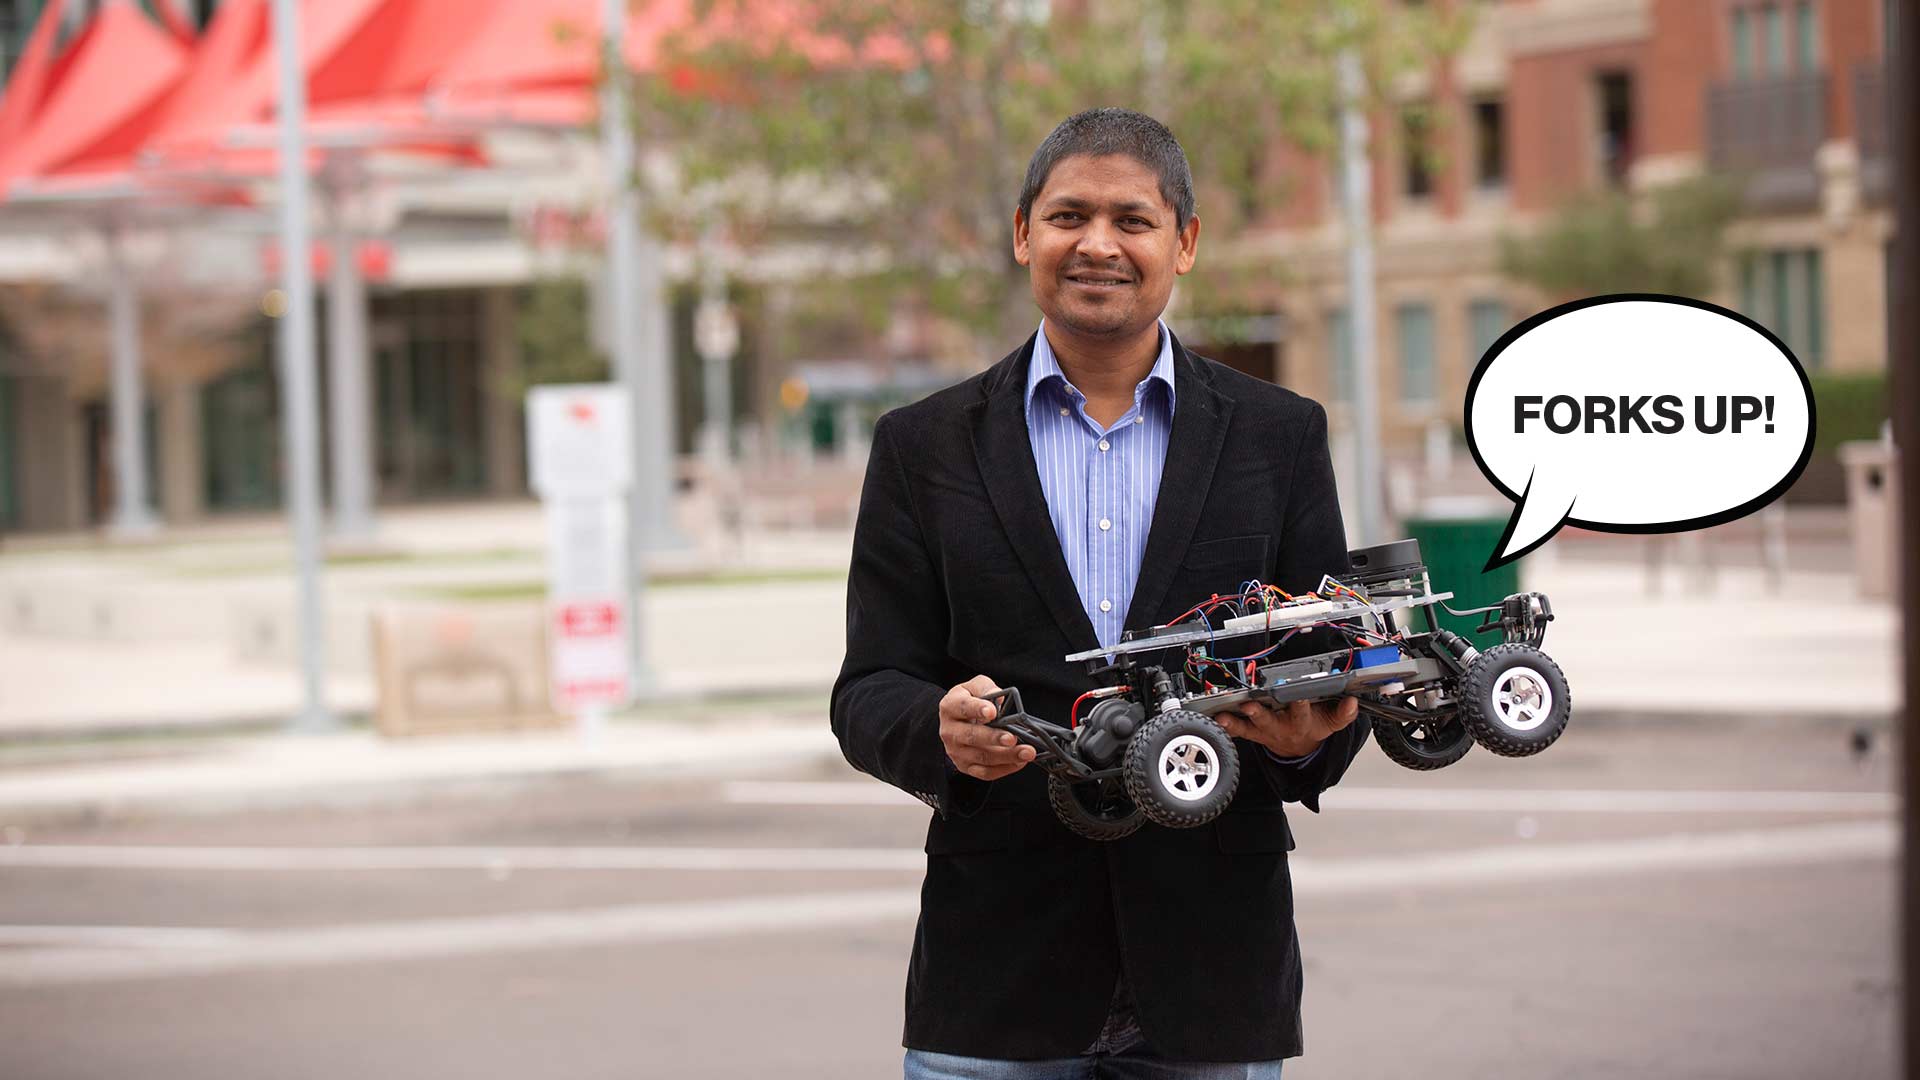 Aviral Shrivastava holding a small vehicle with a speech bubble that says "Forks up!"